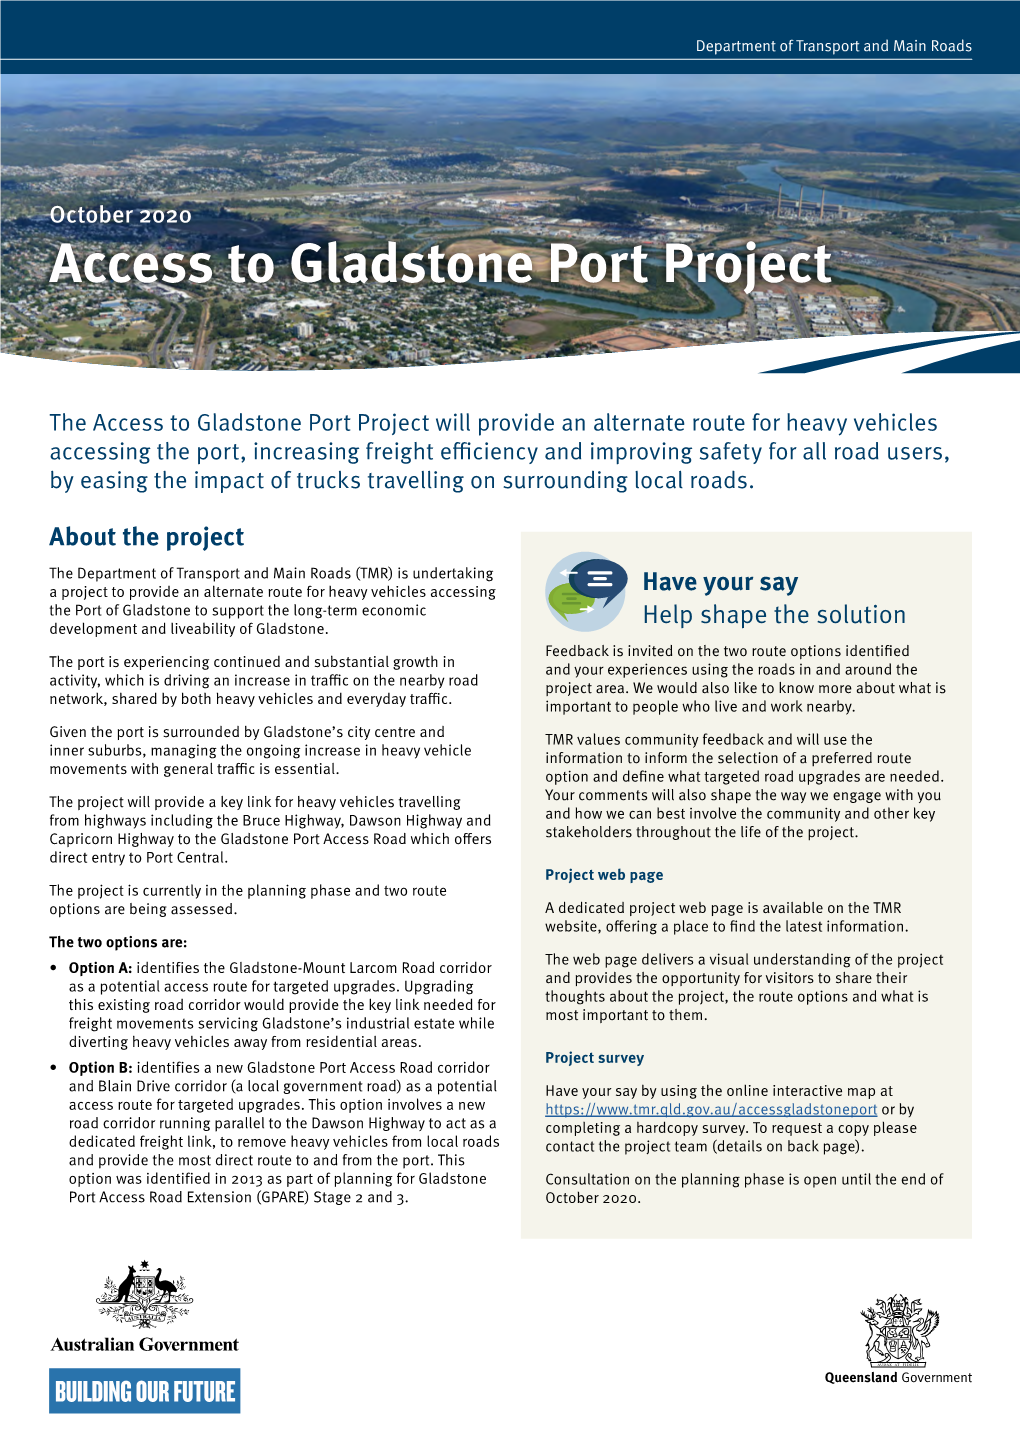 Access to Gladstone Port Project